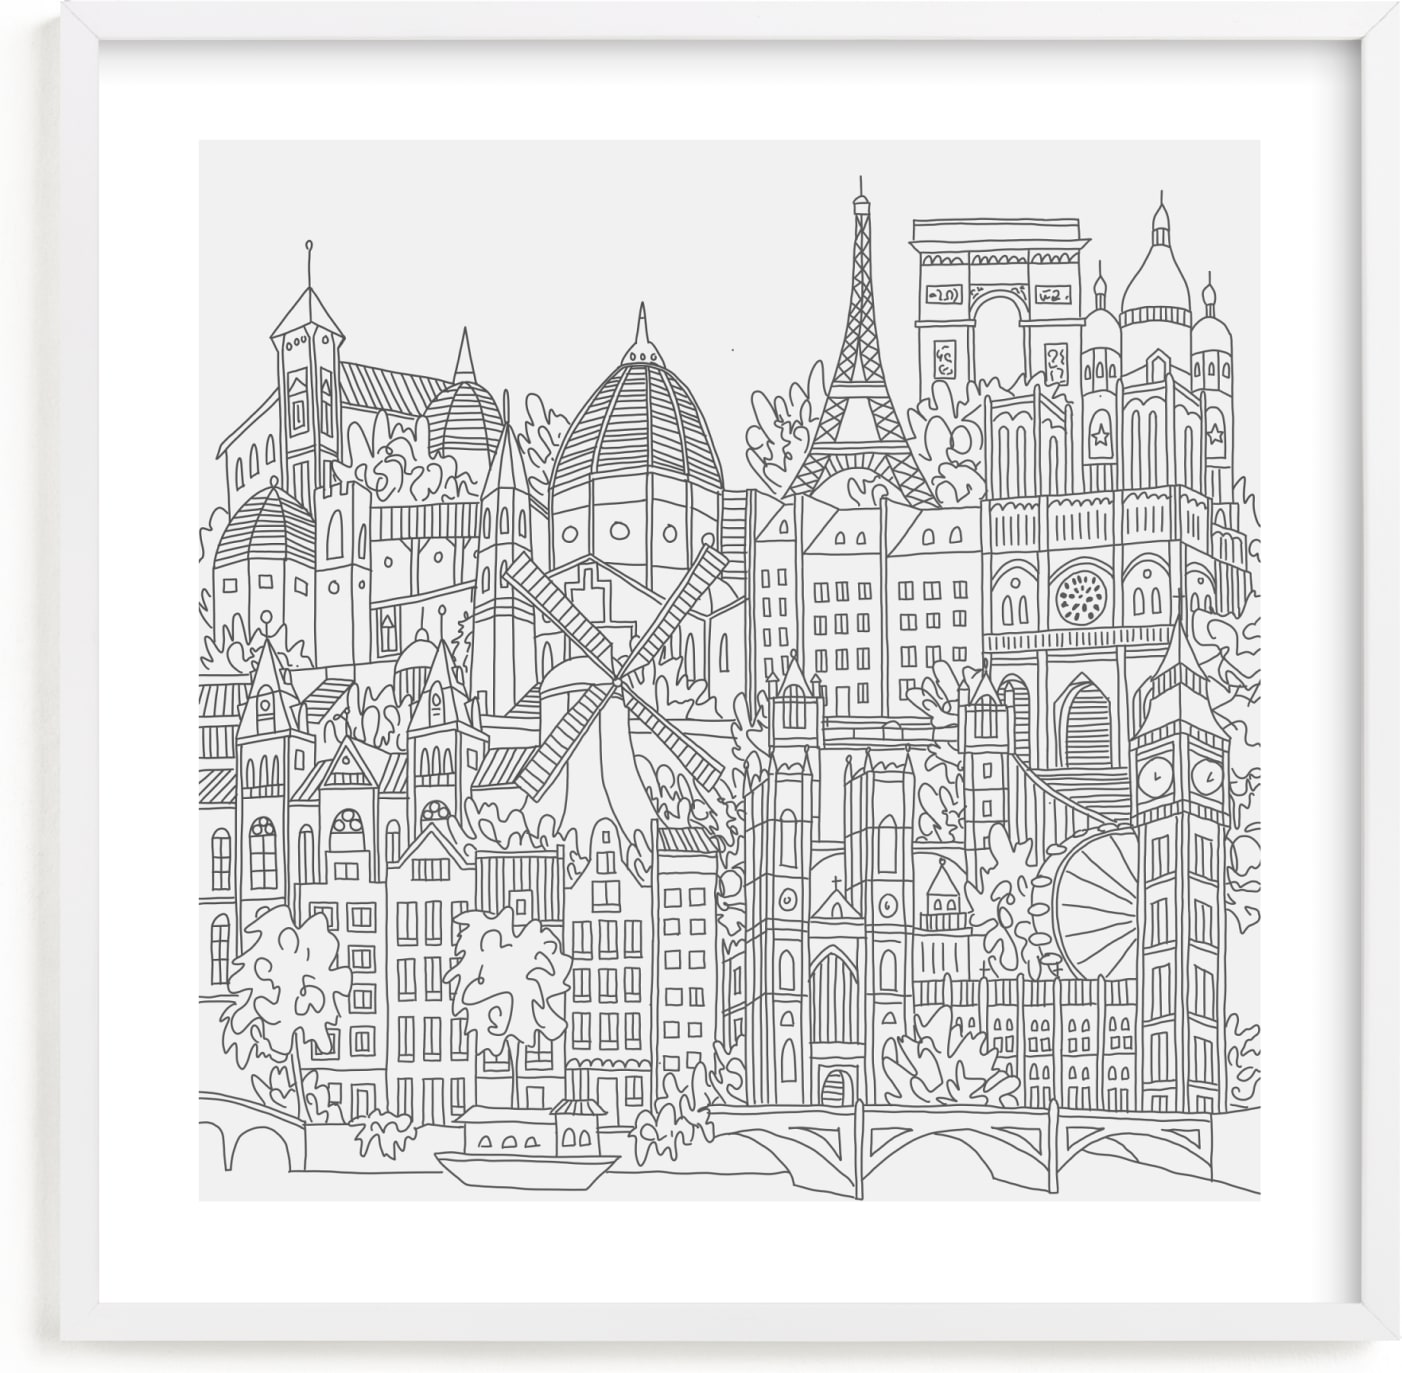 This is a black and white kids wall art by Krissy Bengtson called Study Abroad.